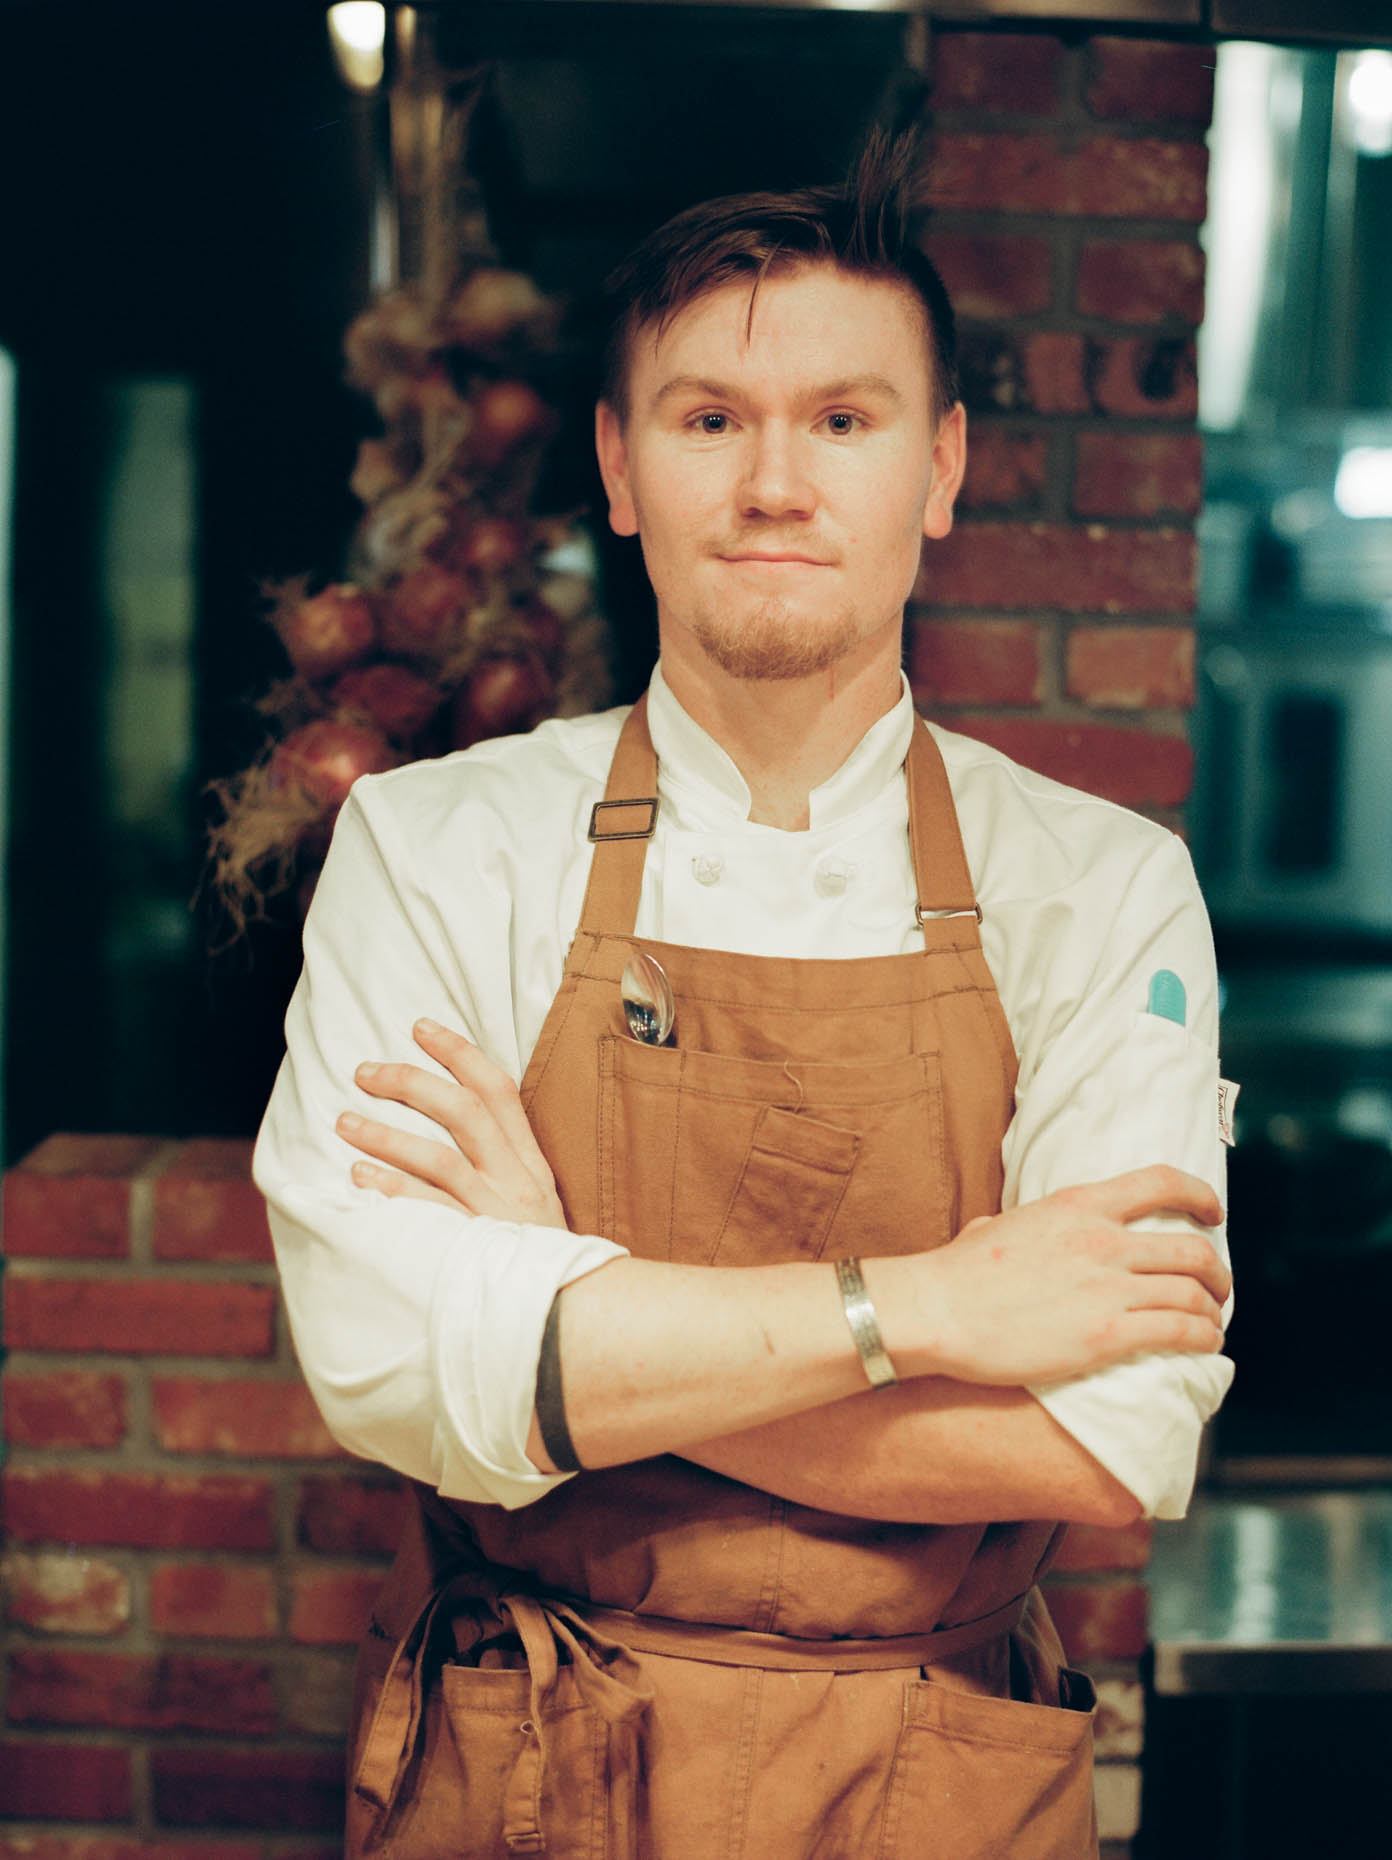 Portrait of a male chef standing with crossed arms in a kitchen